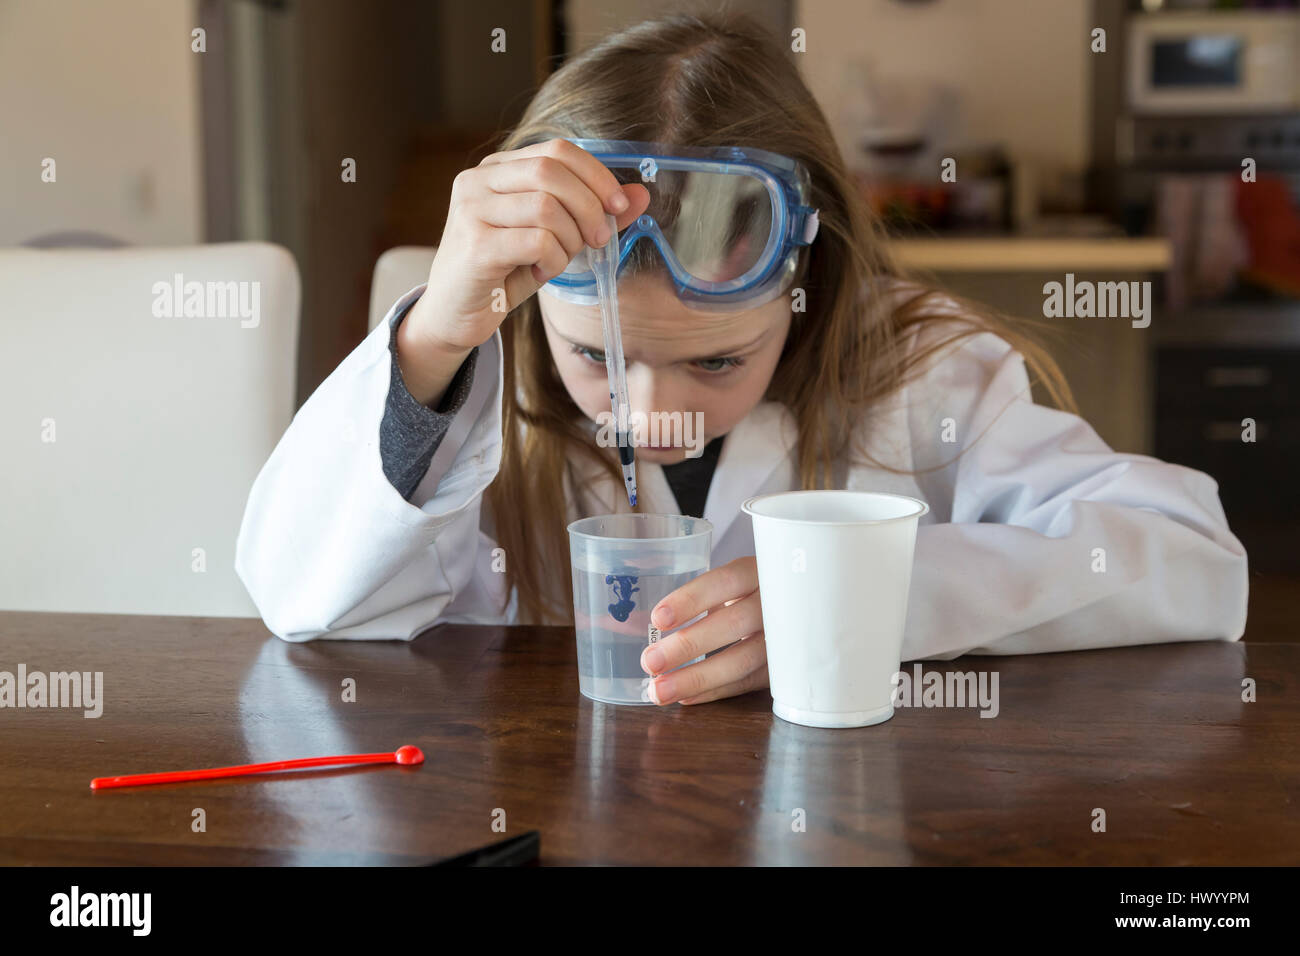 Girl wearing work coat and safety glasses using chemistry set at home Stock Photo